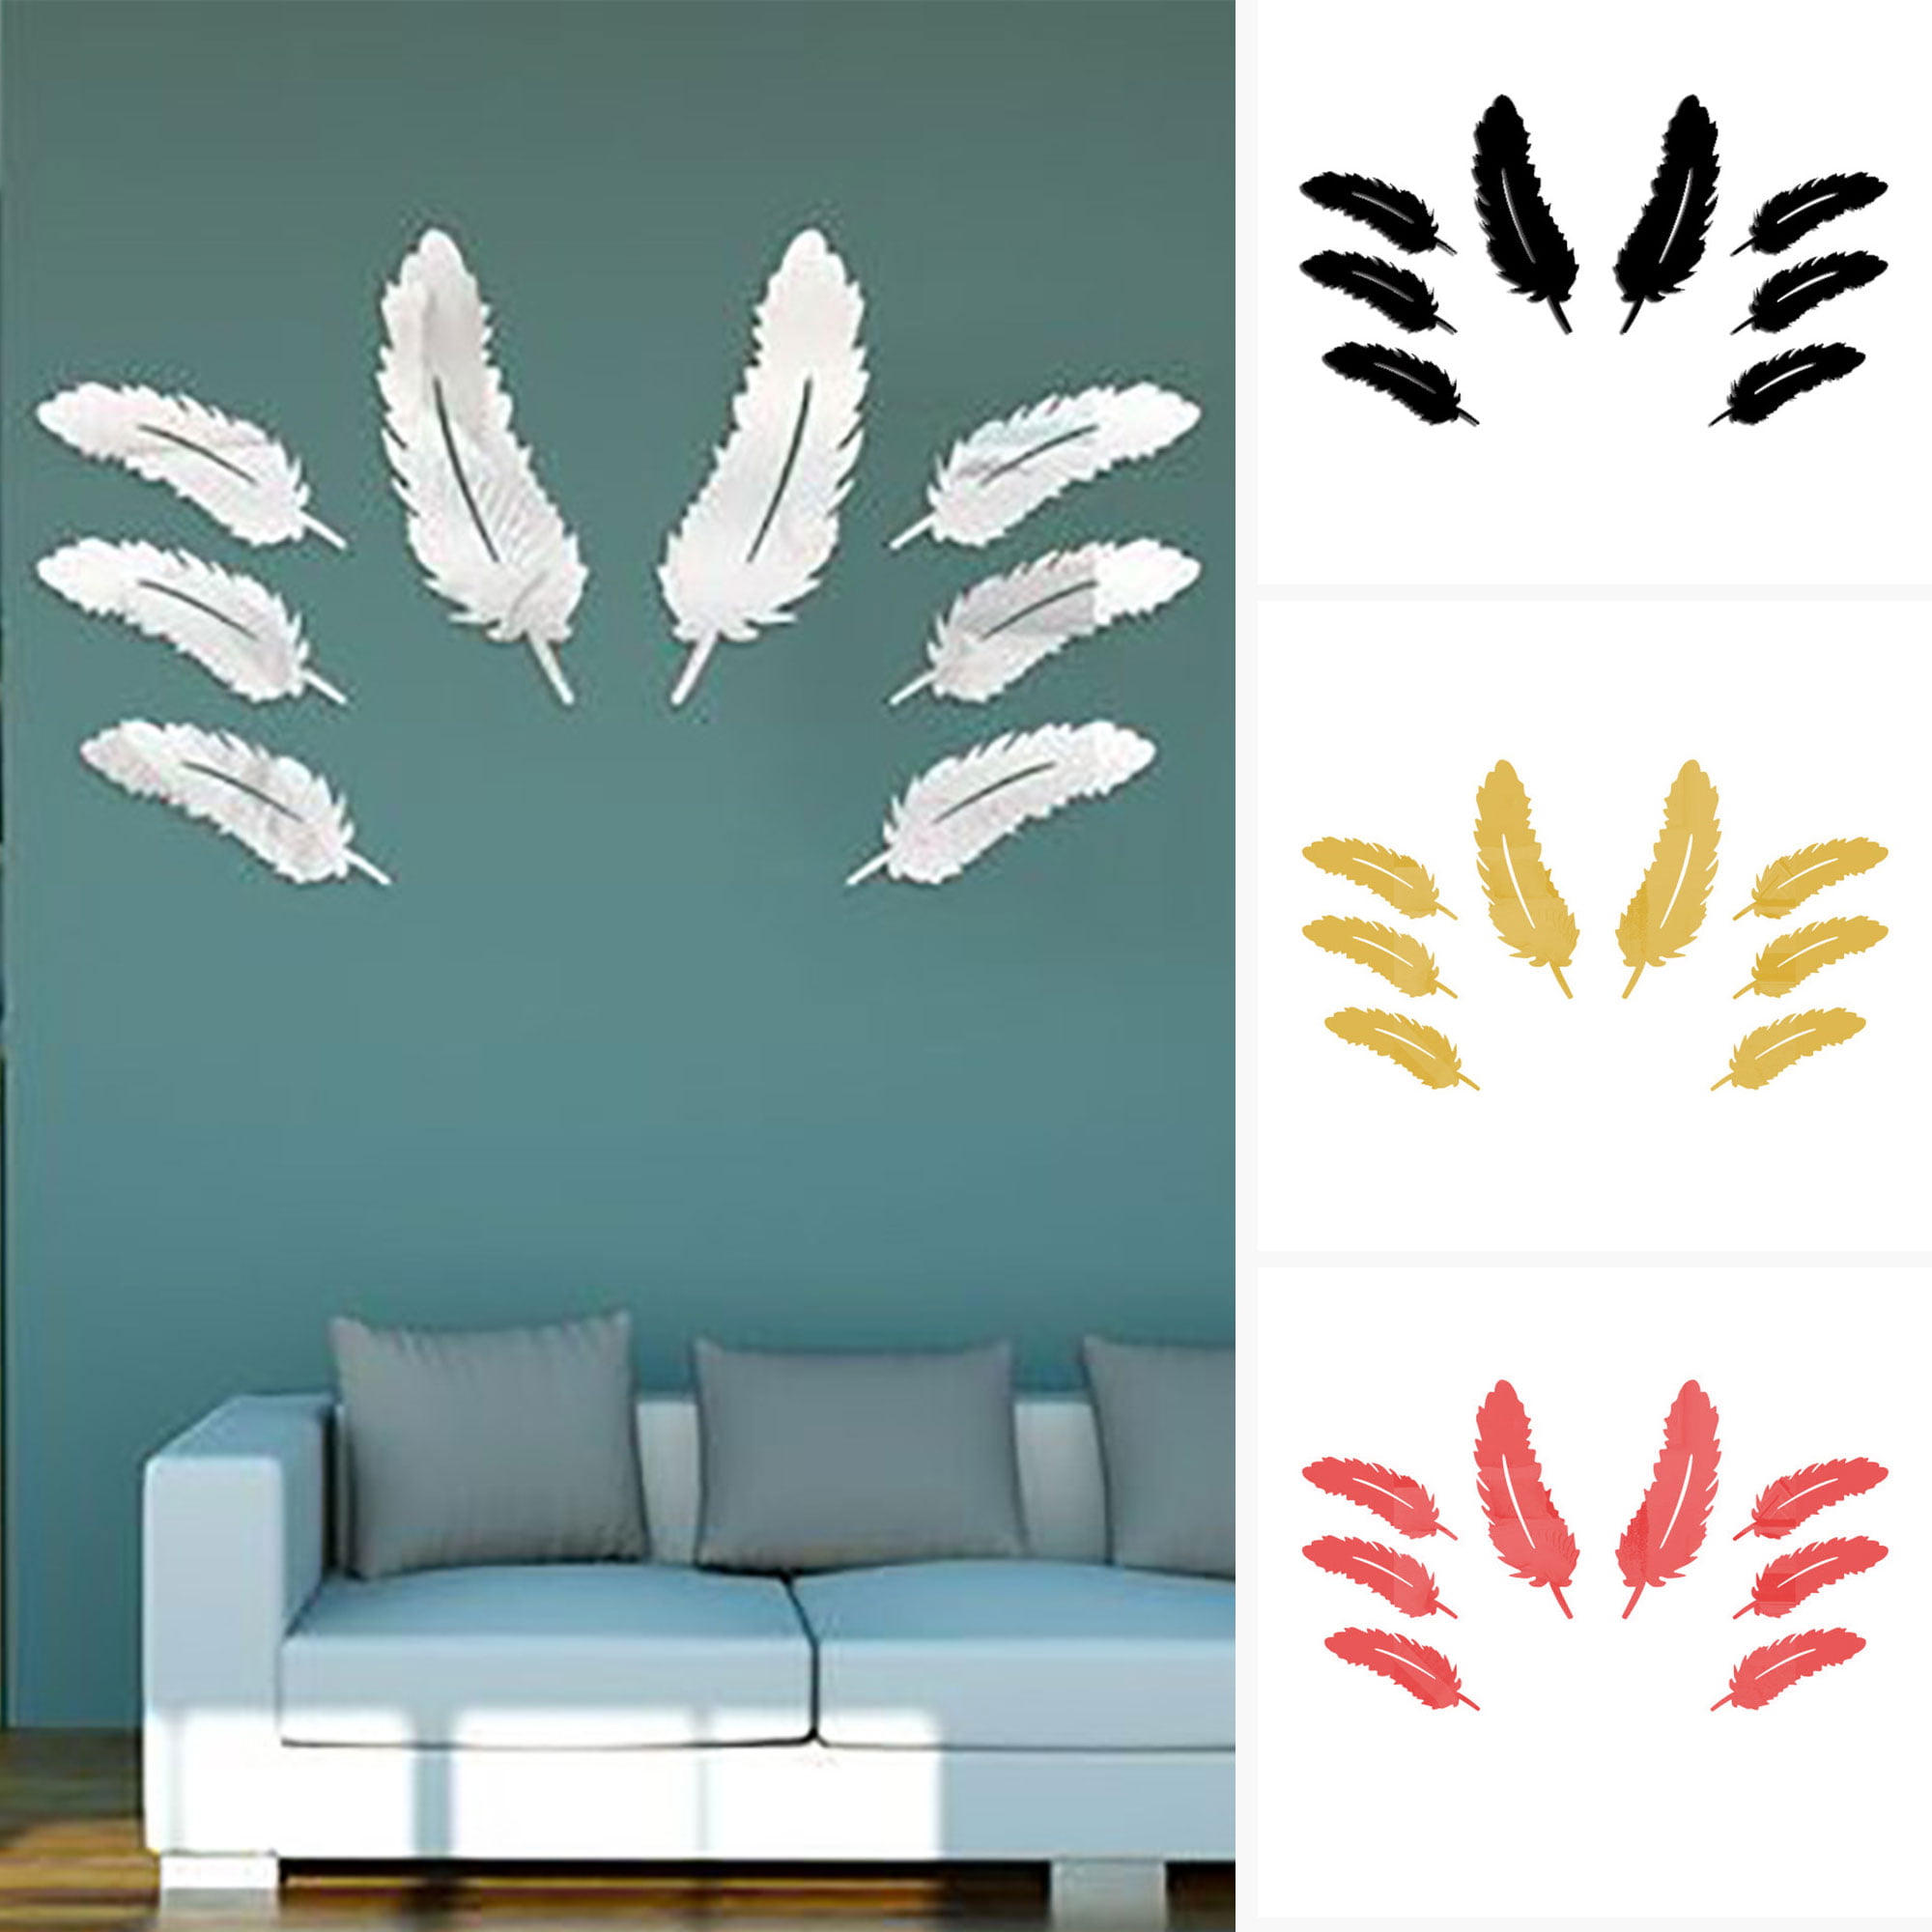 Modern Feather Mirror Removable Decal Art Mural Wall Sticker Home Room DIY Decor 